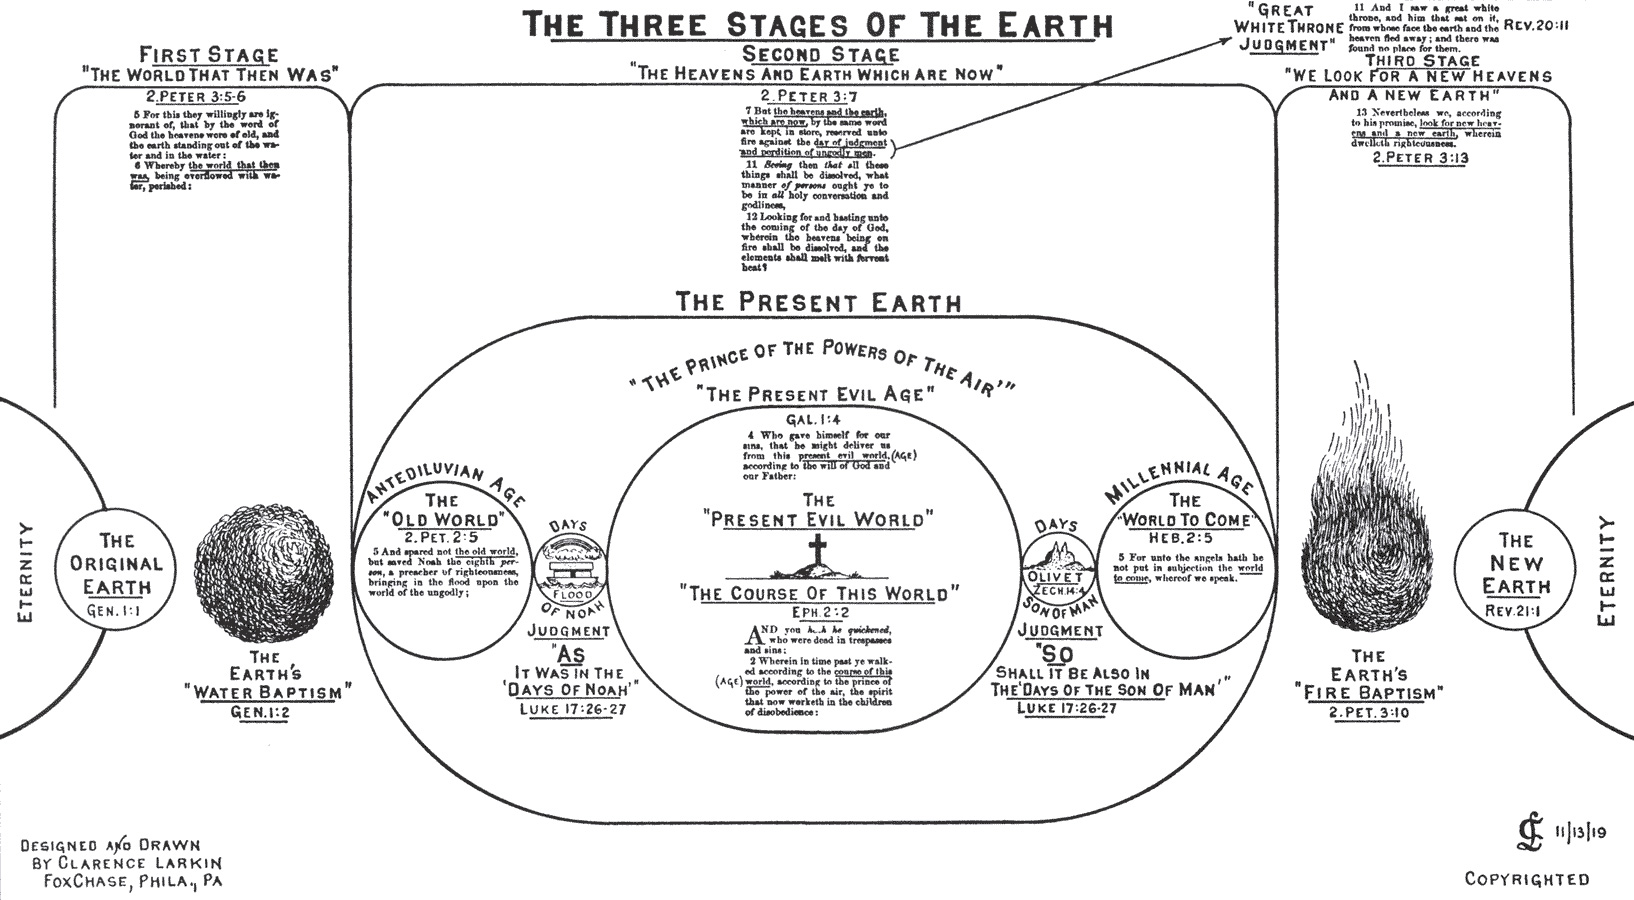 The Three Stages of the Earth Illustration